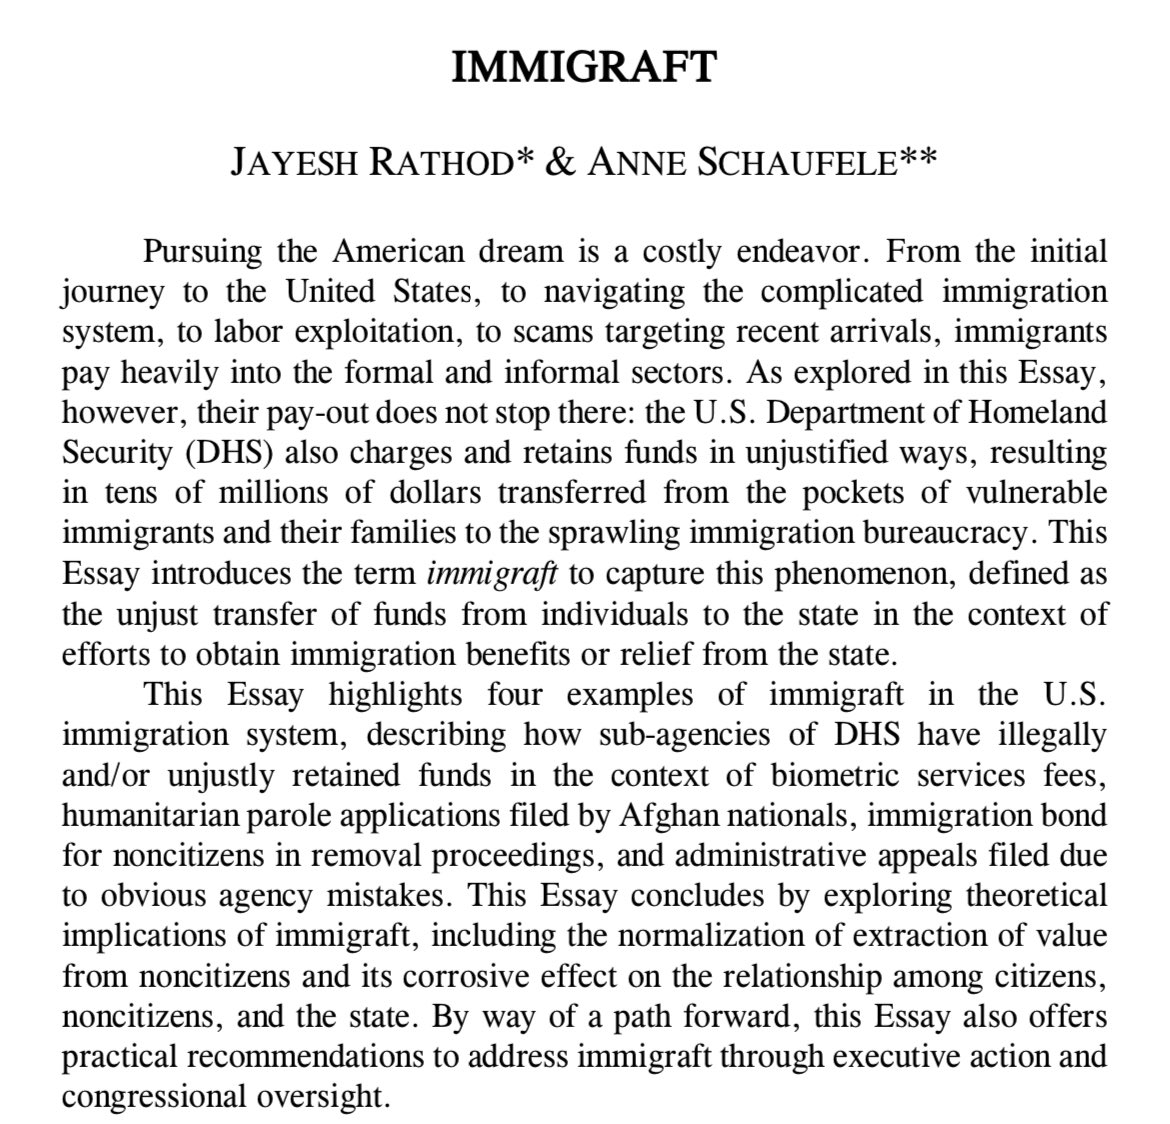 Delighted to share a recent essay, Immigraft, co-authored with Anne Schaufele @UDCLaw and published in @WisLRev. We explore the unjust (often illegal) charging and retention of fees/payments by US immigration agencies. Check it out: papers.ssrn.com/sol3/papers.cf…